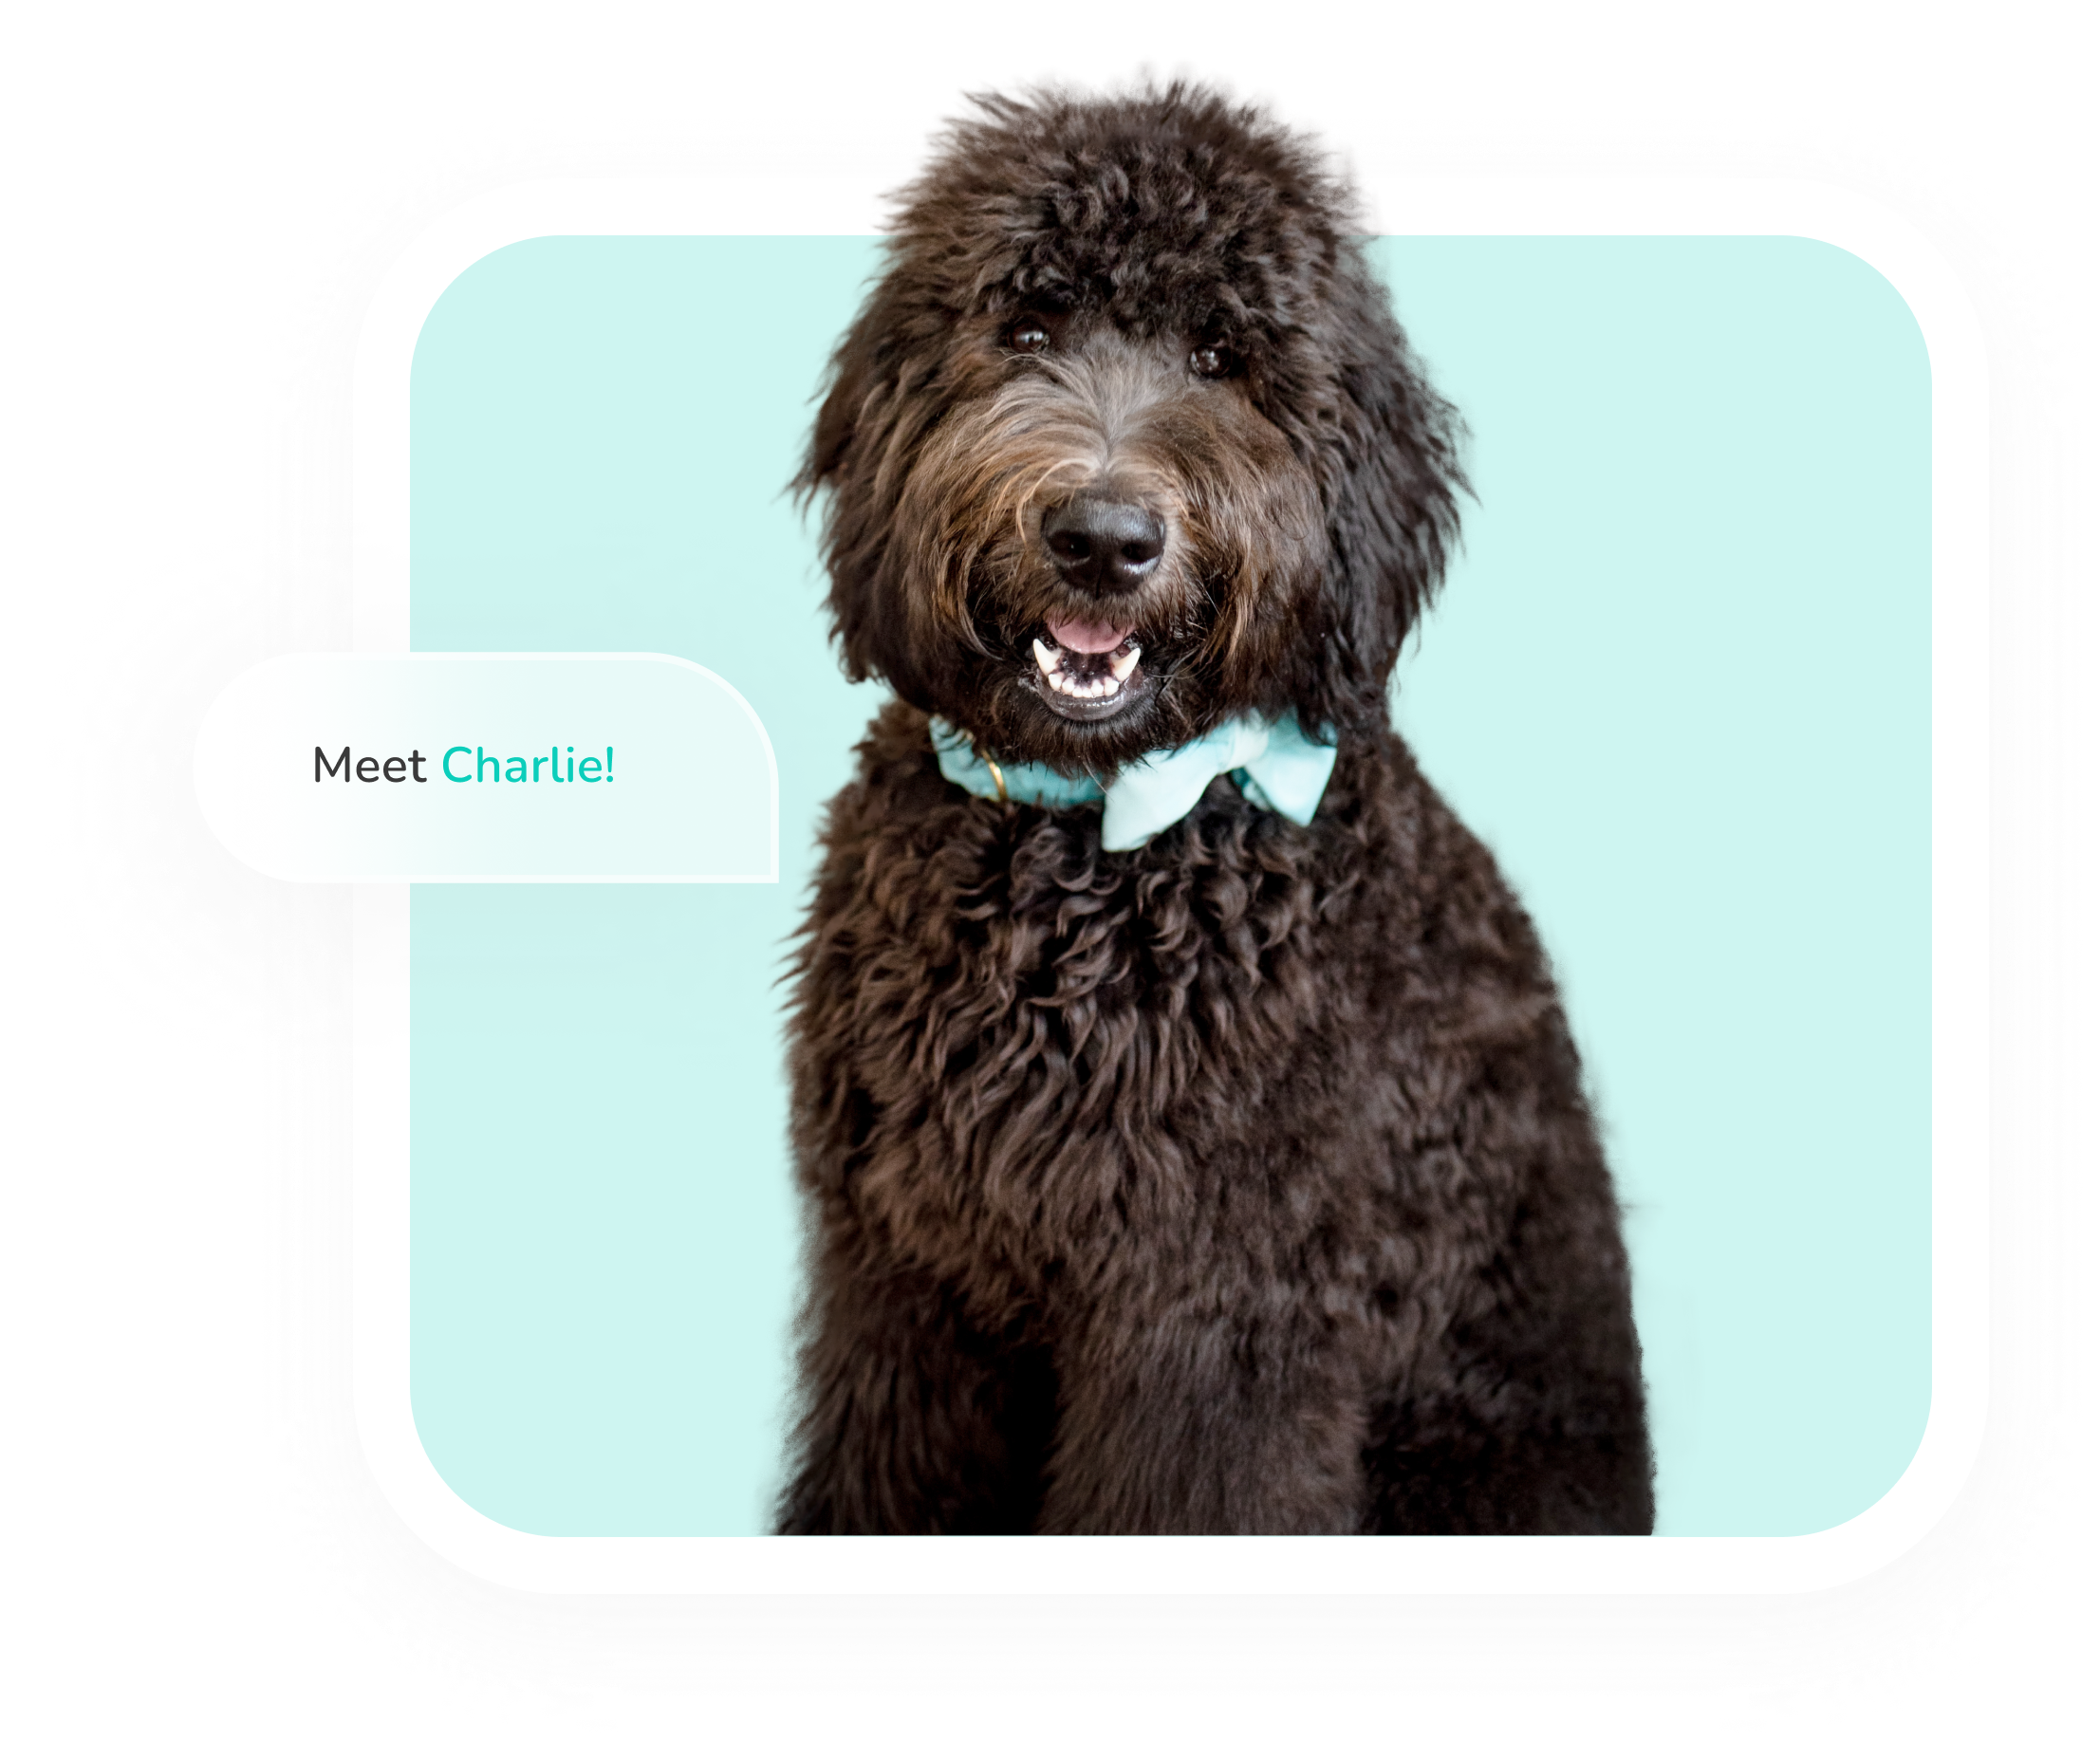 Charlie the dog has a cute scarf around his neck that matches the light shade of blue background. There is a text bubble on the image with the words: 'Meet Charlie!'.